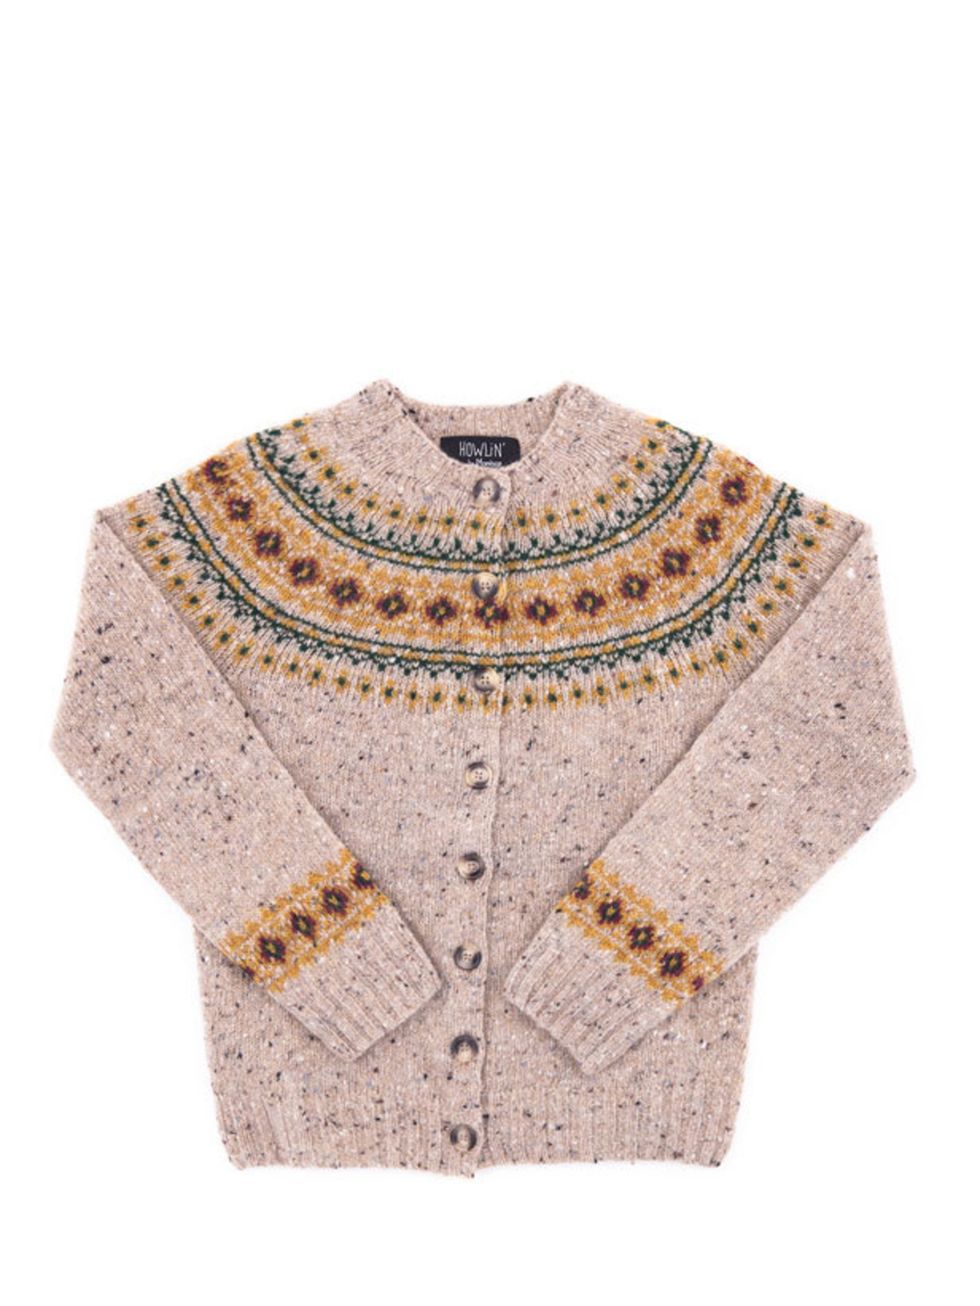 <p>If youre going to invest in some new knitwear this week, make sure its a heritage print made by independent weavers, just like this covetable cardi Howlin by Morrison cardigan, £166, at <a href="http://www.centrecommercial.cc/fr/product/femme/pulls+